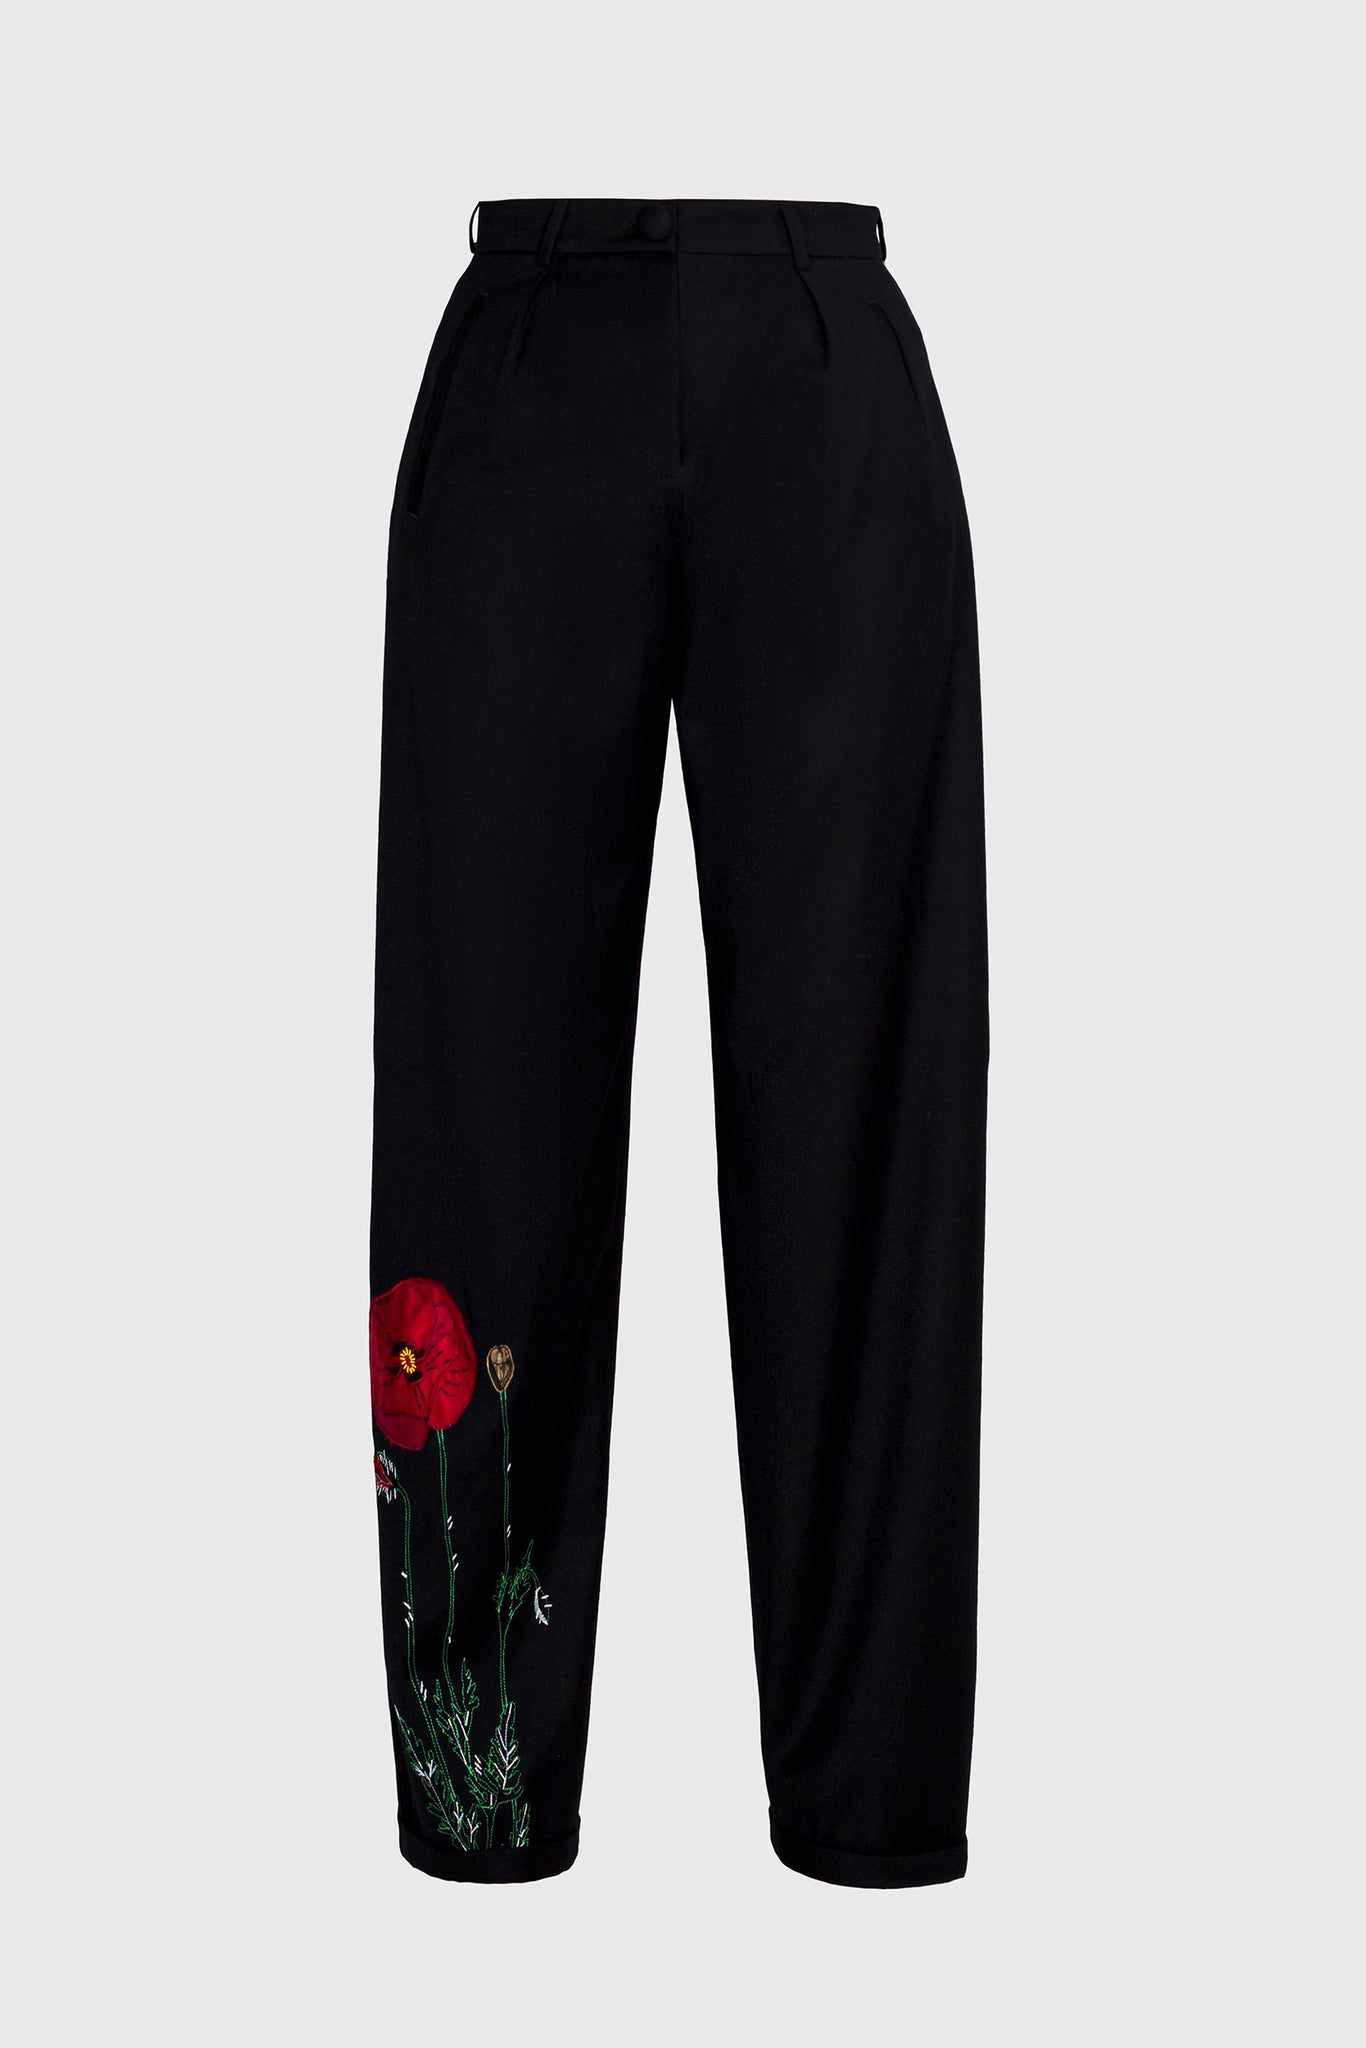 Straight cut, high waist trousers, with belt loops, side pockets and rear pockets, matching covered buttons, custom tailored trousers for women in power, for business women, luxury seekers in fashion design